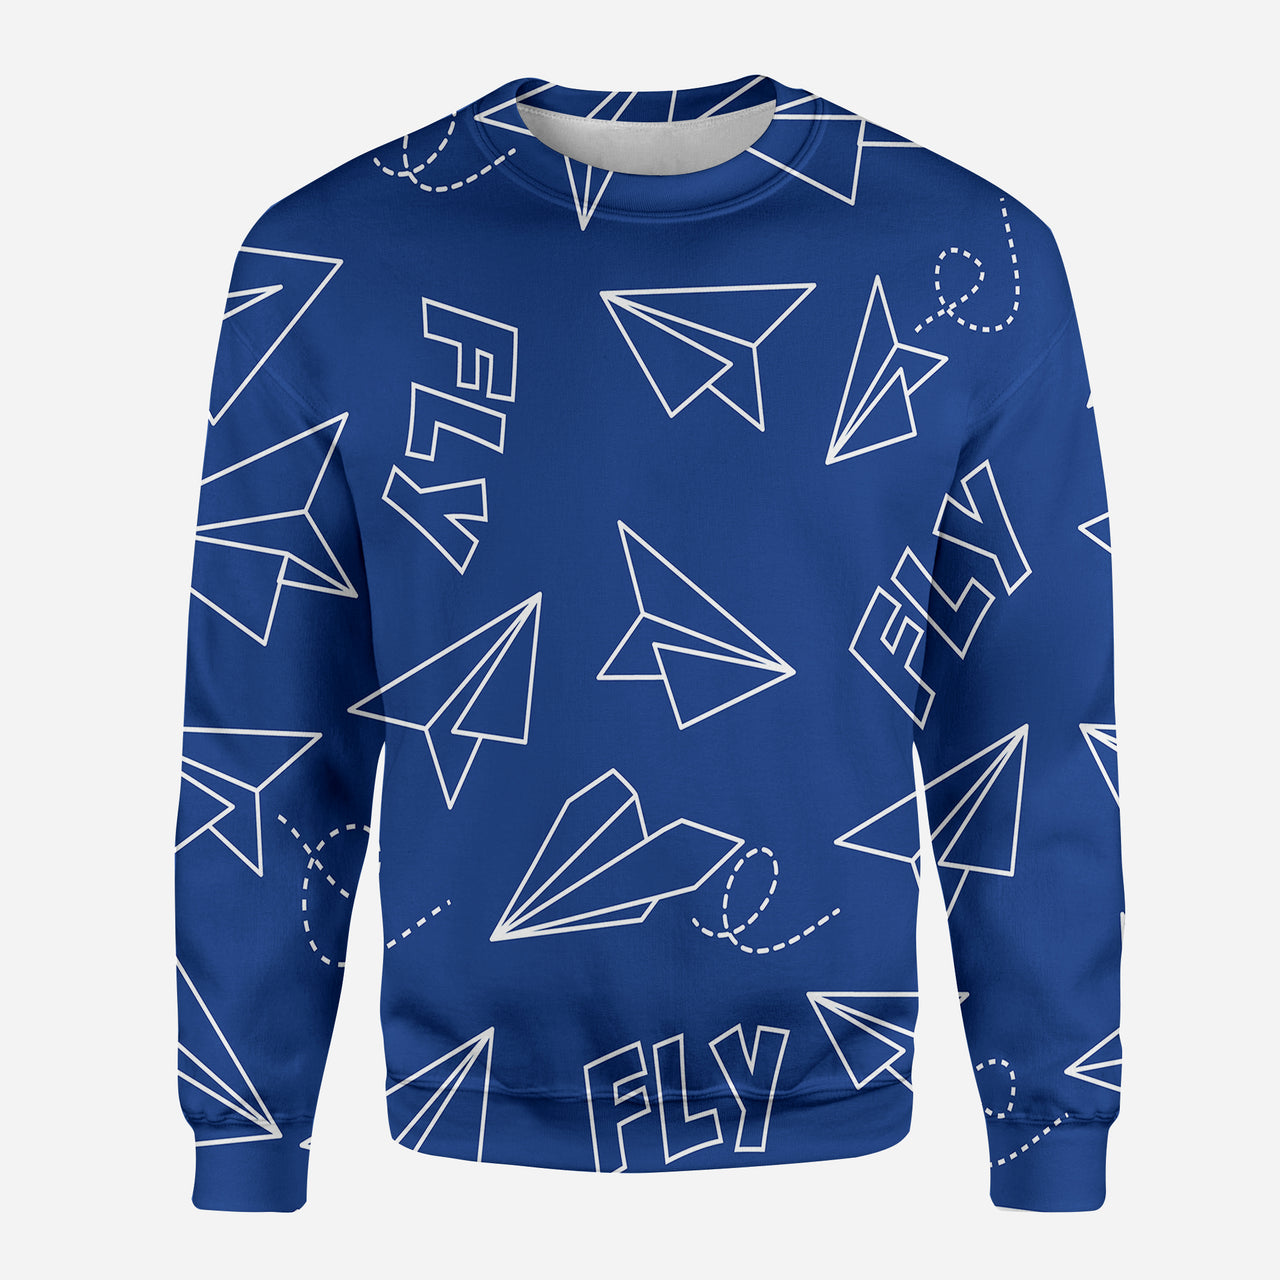 Paper Airplane & Fly (Blue) Designed 3D Sweatshirts